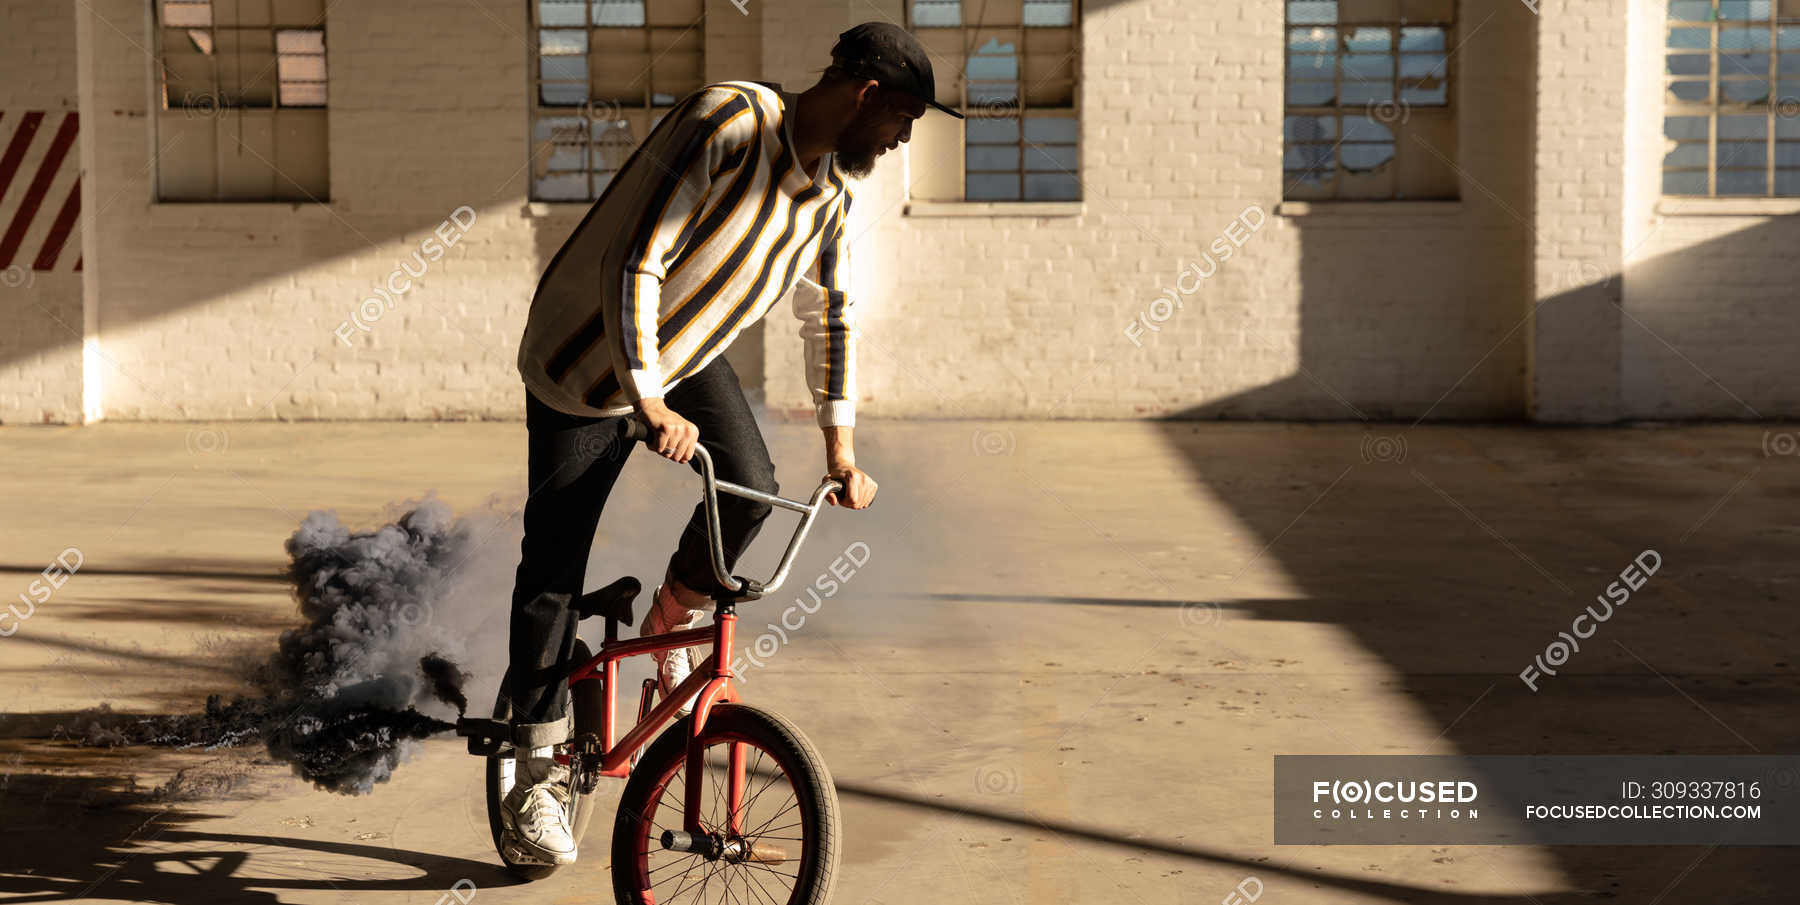 Front view of a young Caucasian man riding a BMX bike with a grey smoke  grenade attached to it, in an abandoned warehouse — unaccompanied, extreme  sport - Stock Photo | #309337816